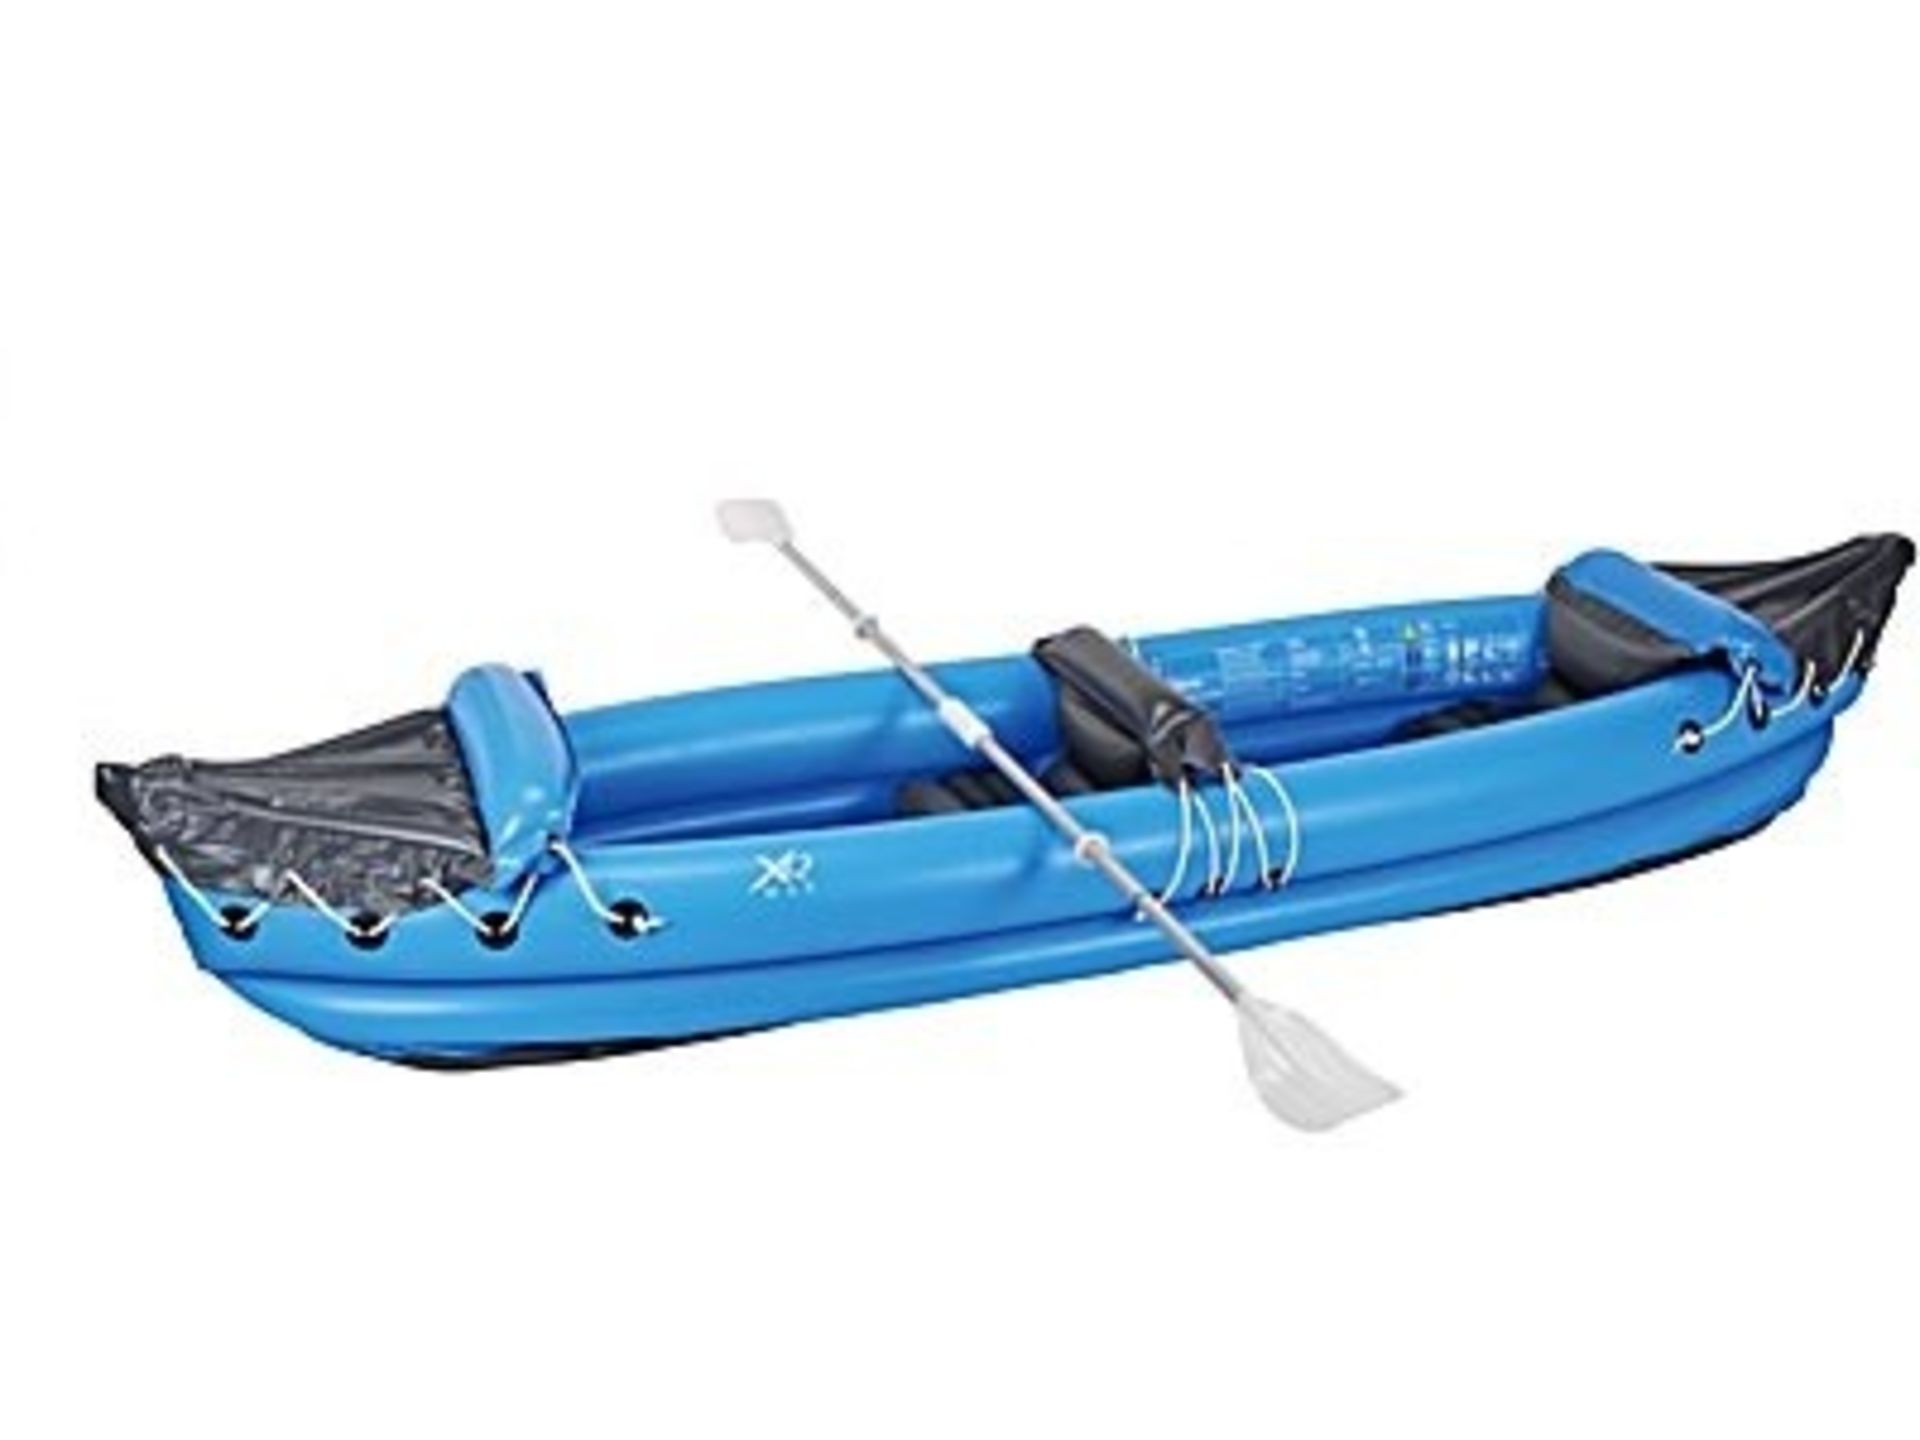 V Brand New 2 Person Inflatable Kayak/Canoe with Paddles - Constructed from Durable PVC - Two